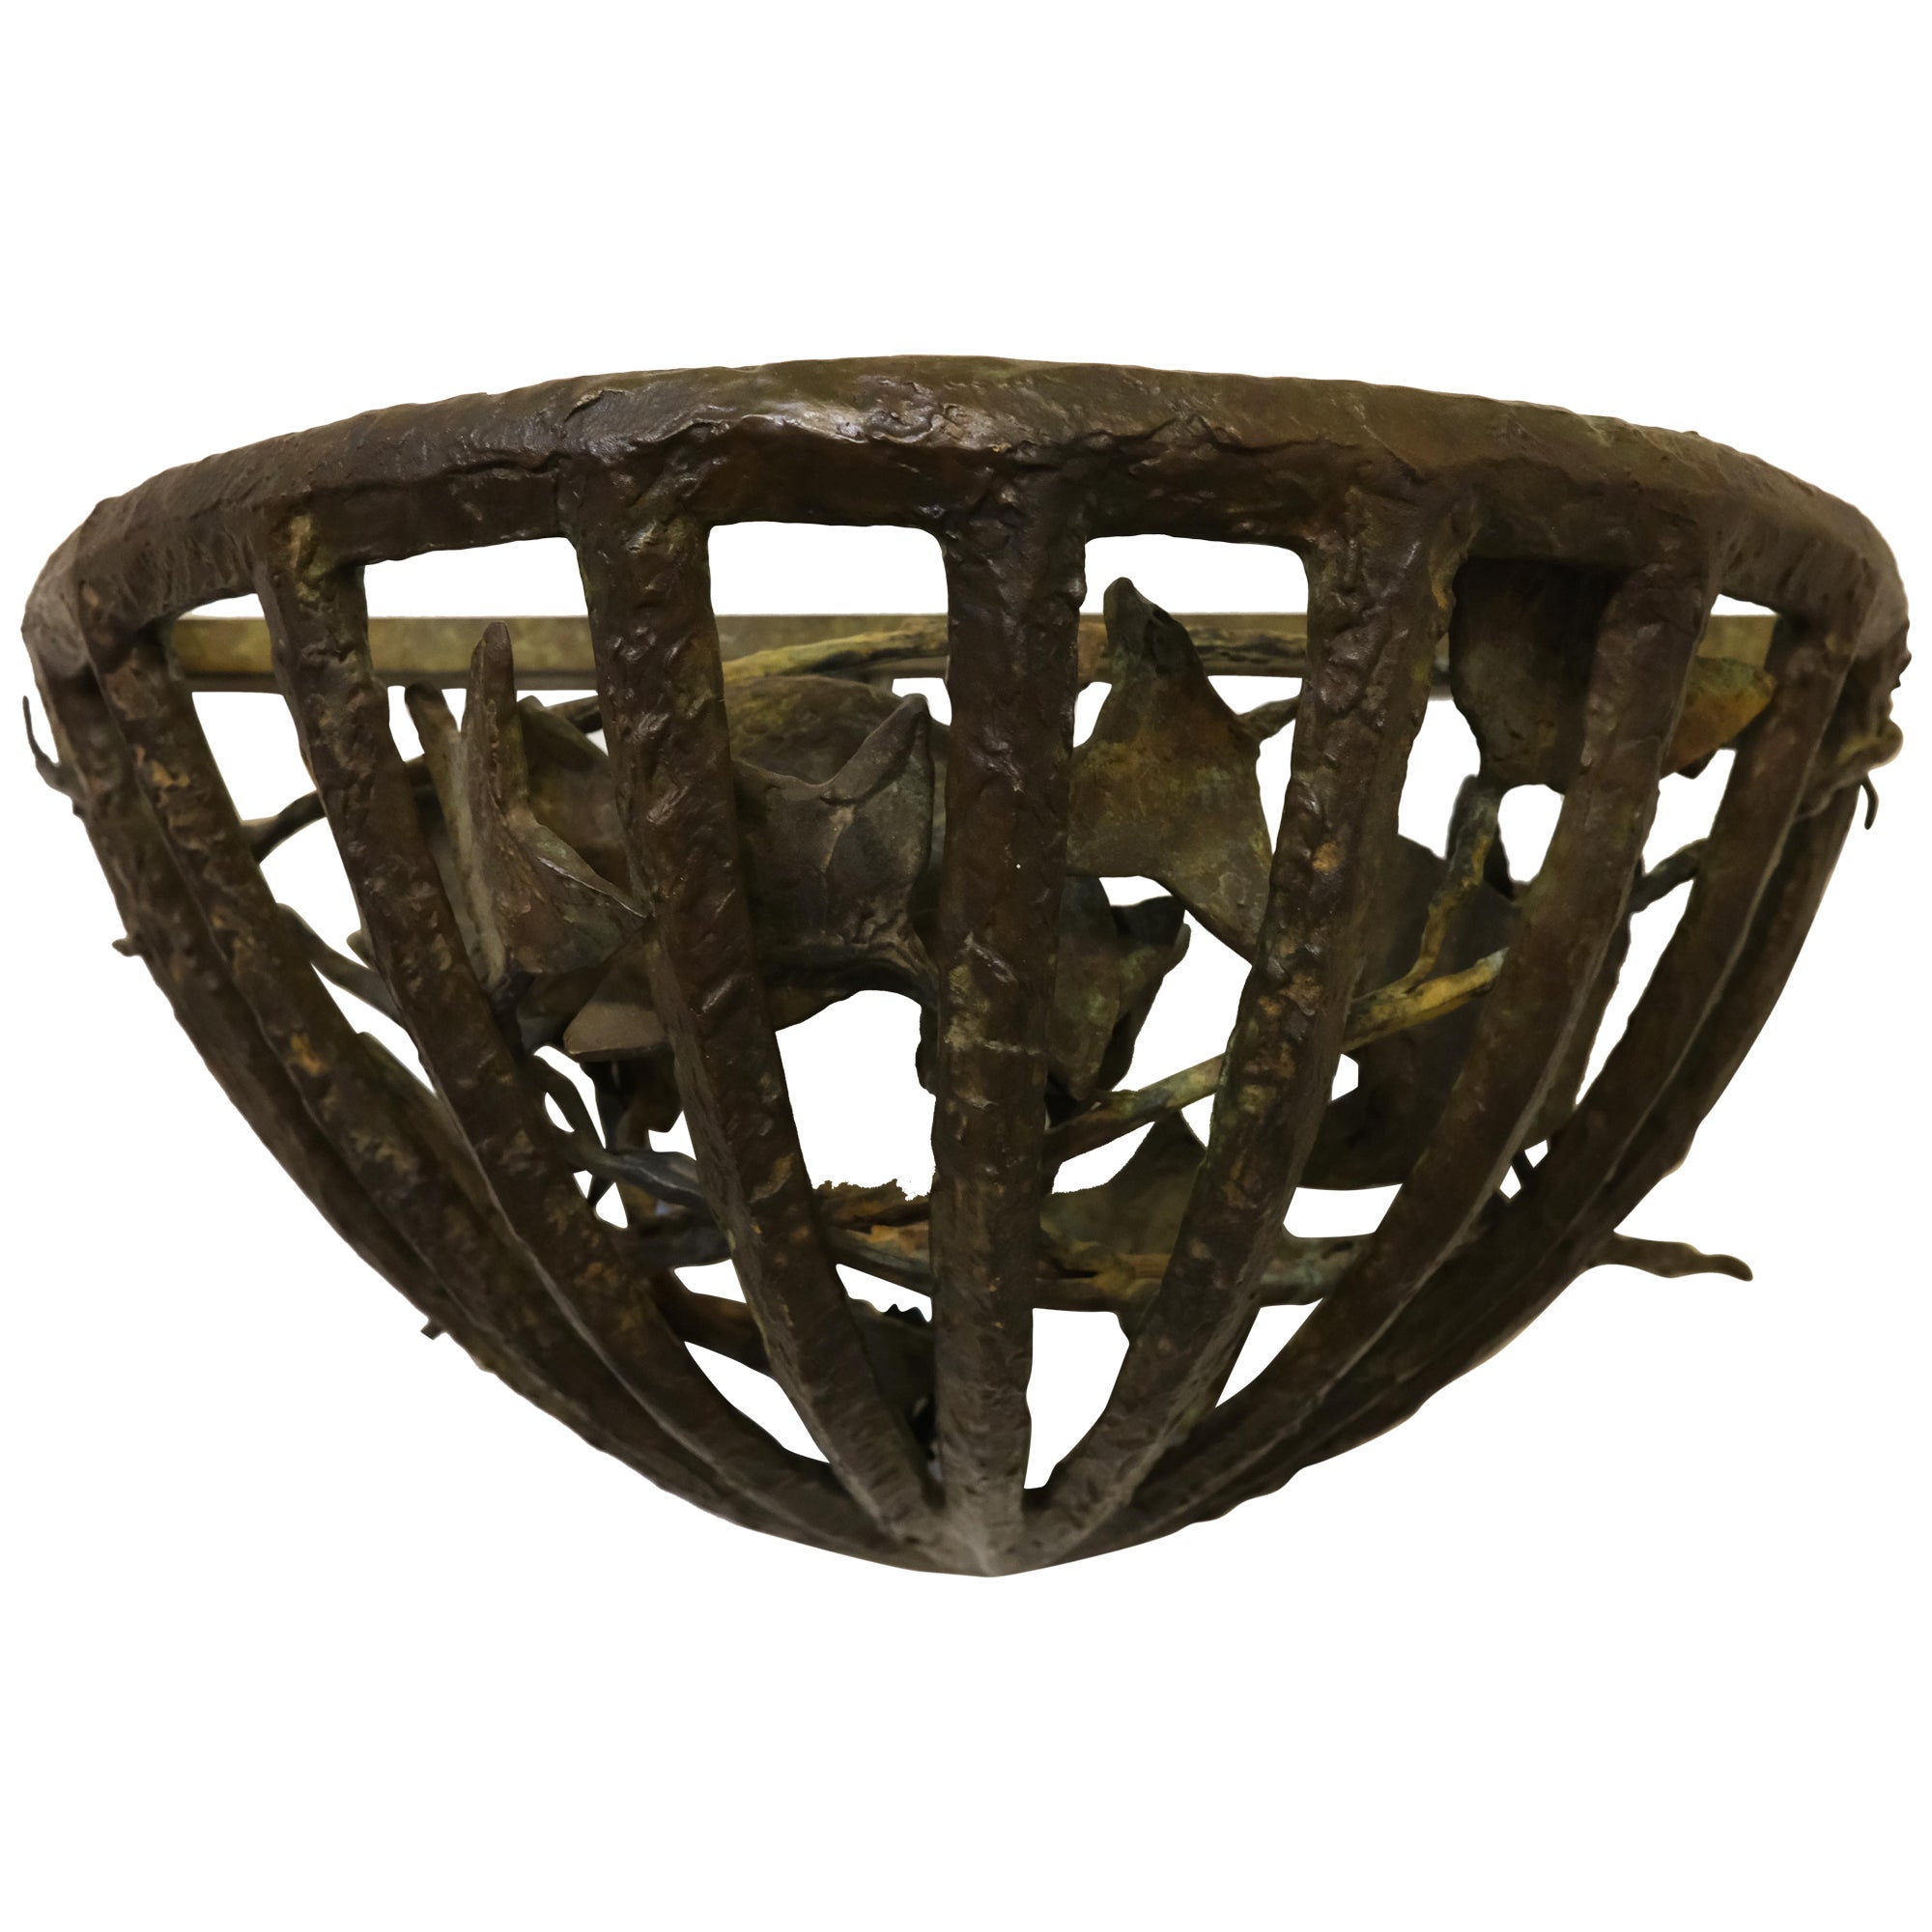 Philippe Anthonioz (1953), patinated bronze sconce, circa 1988, France. For Sale